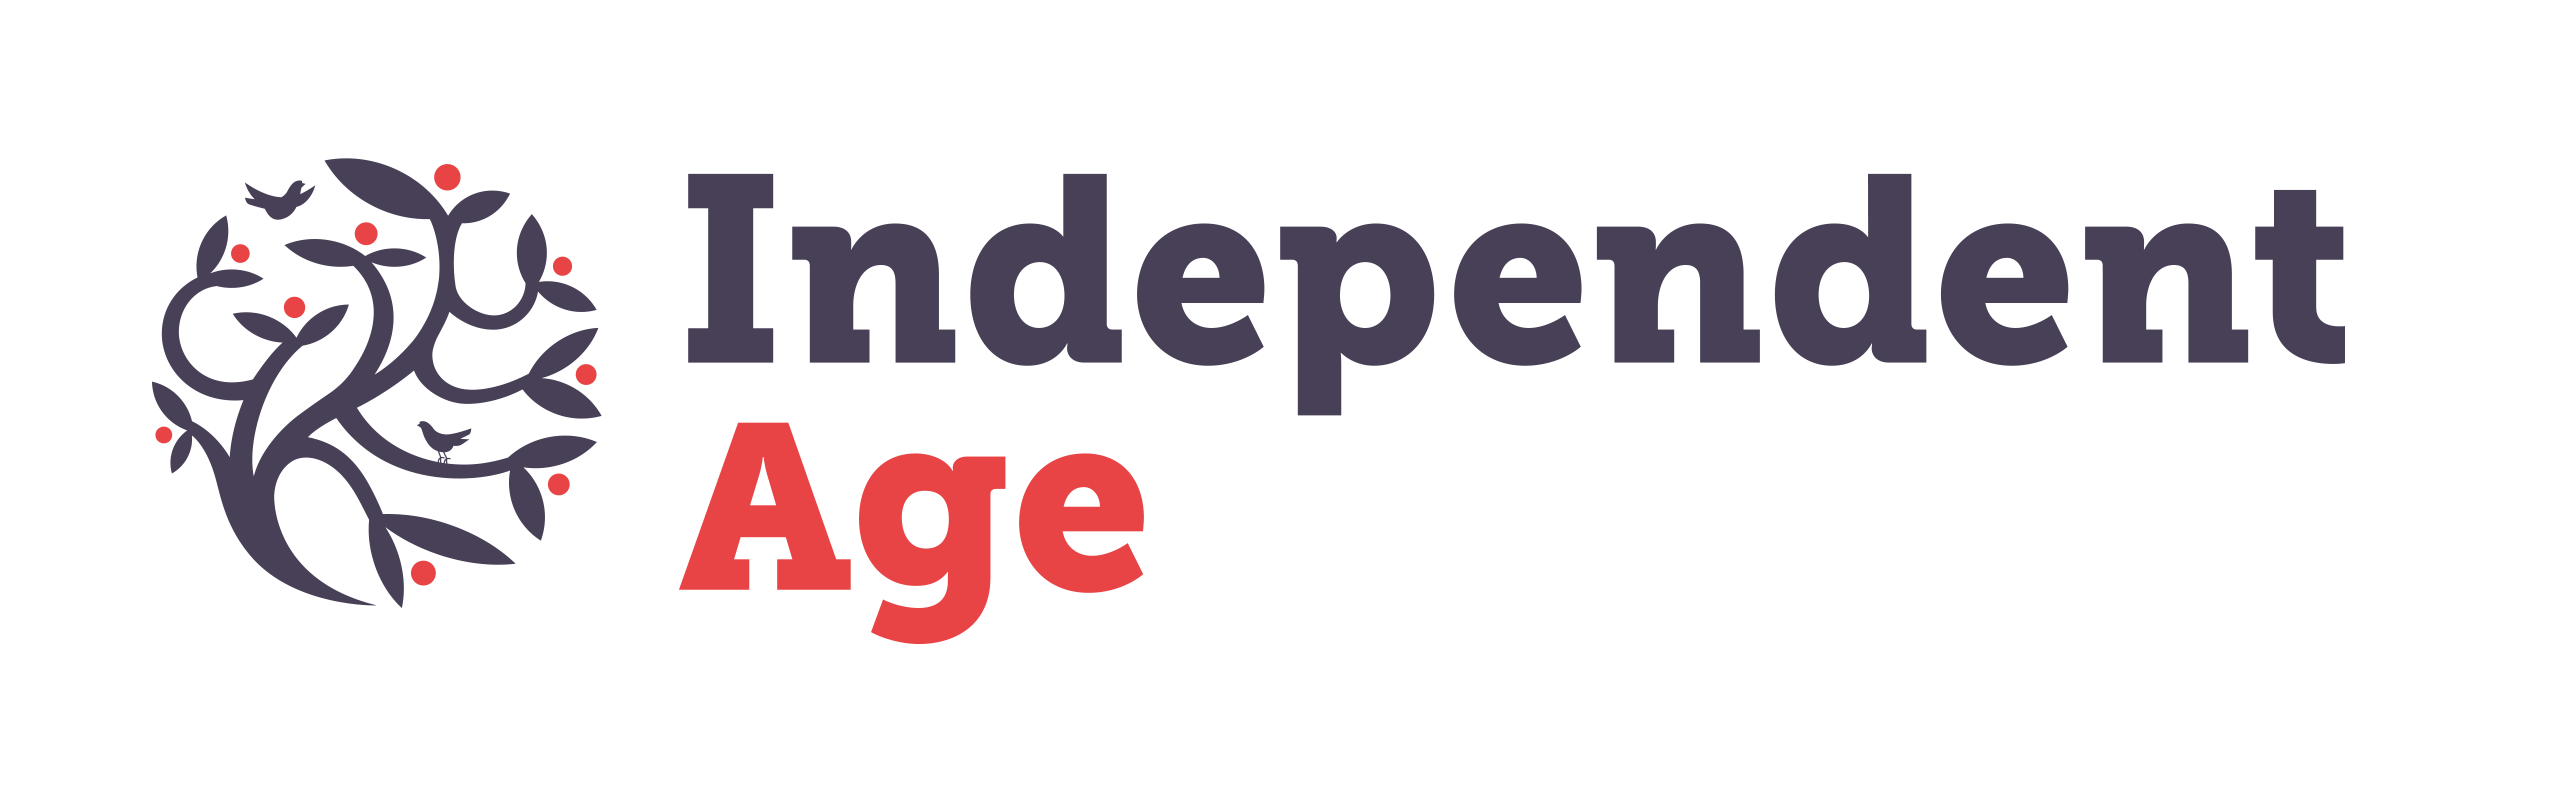 logo for Independent Age